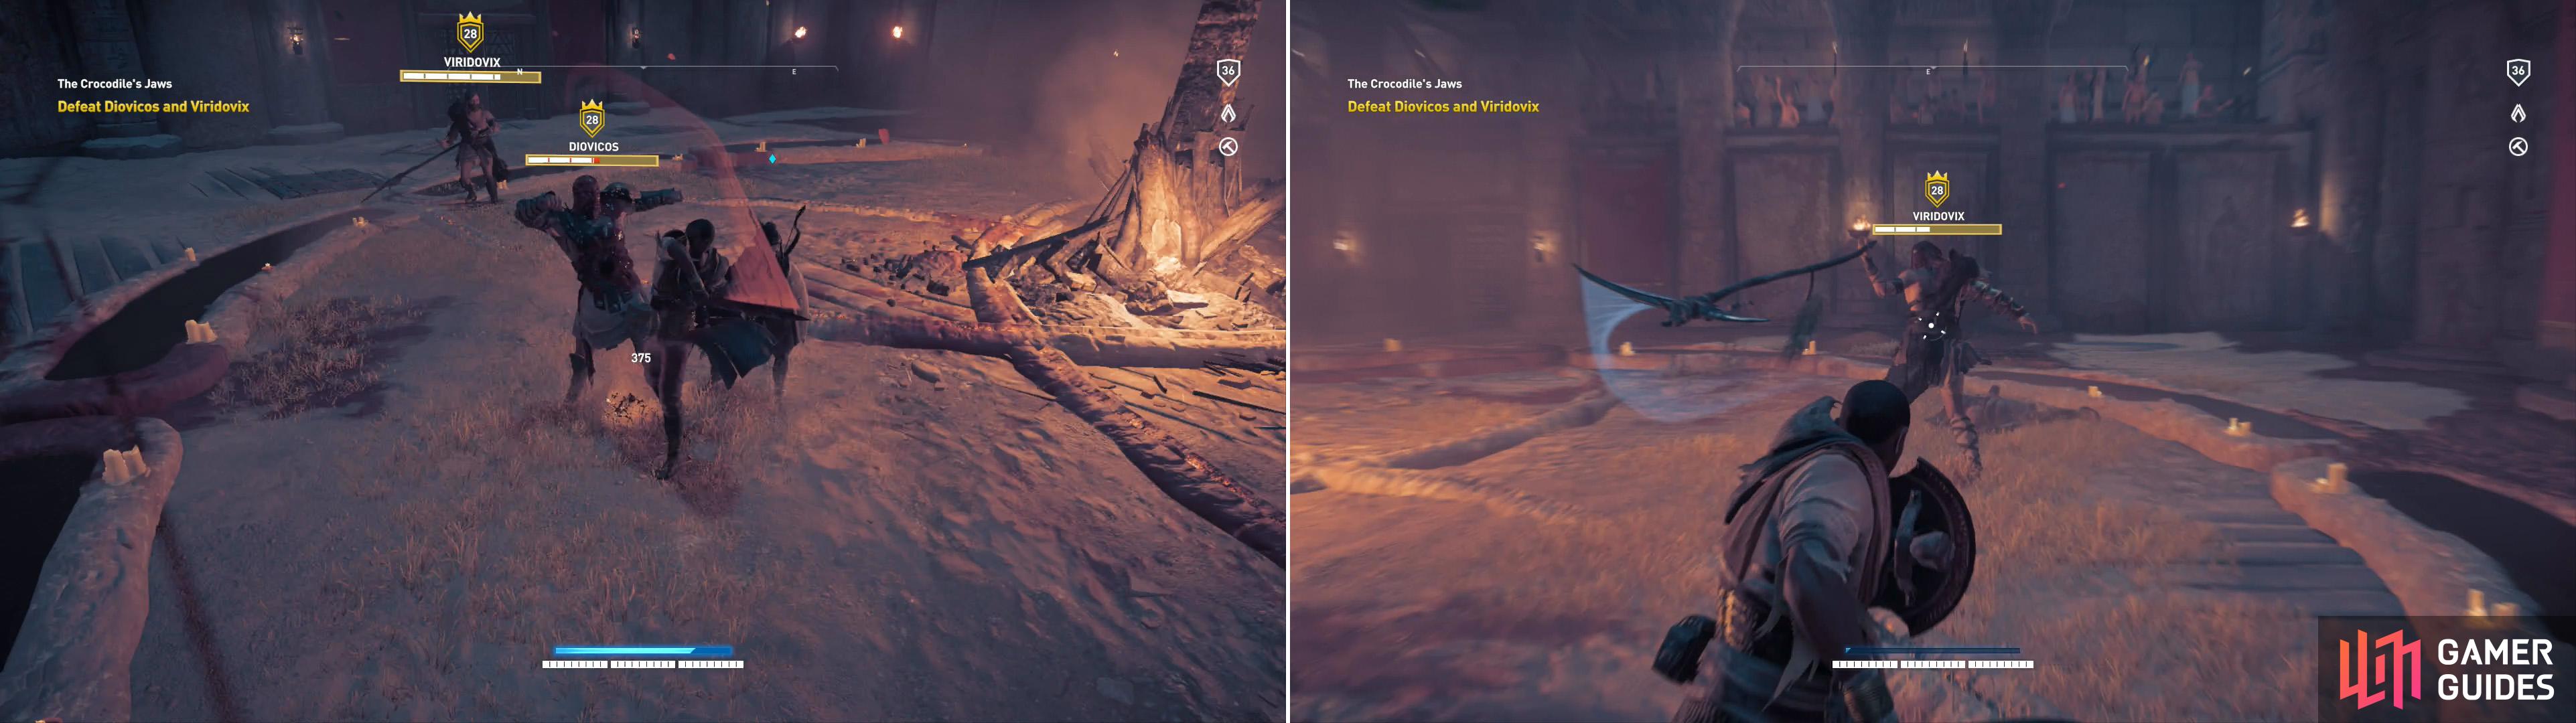 Diovicos can be lured from his brother, where he's susceptible to hit-and-run heavy attacks (left). Viridovix is slower than his brother, but has superior attack range (right).